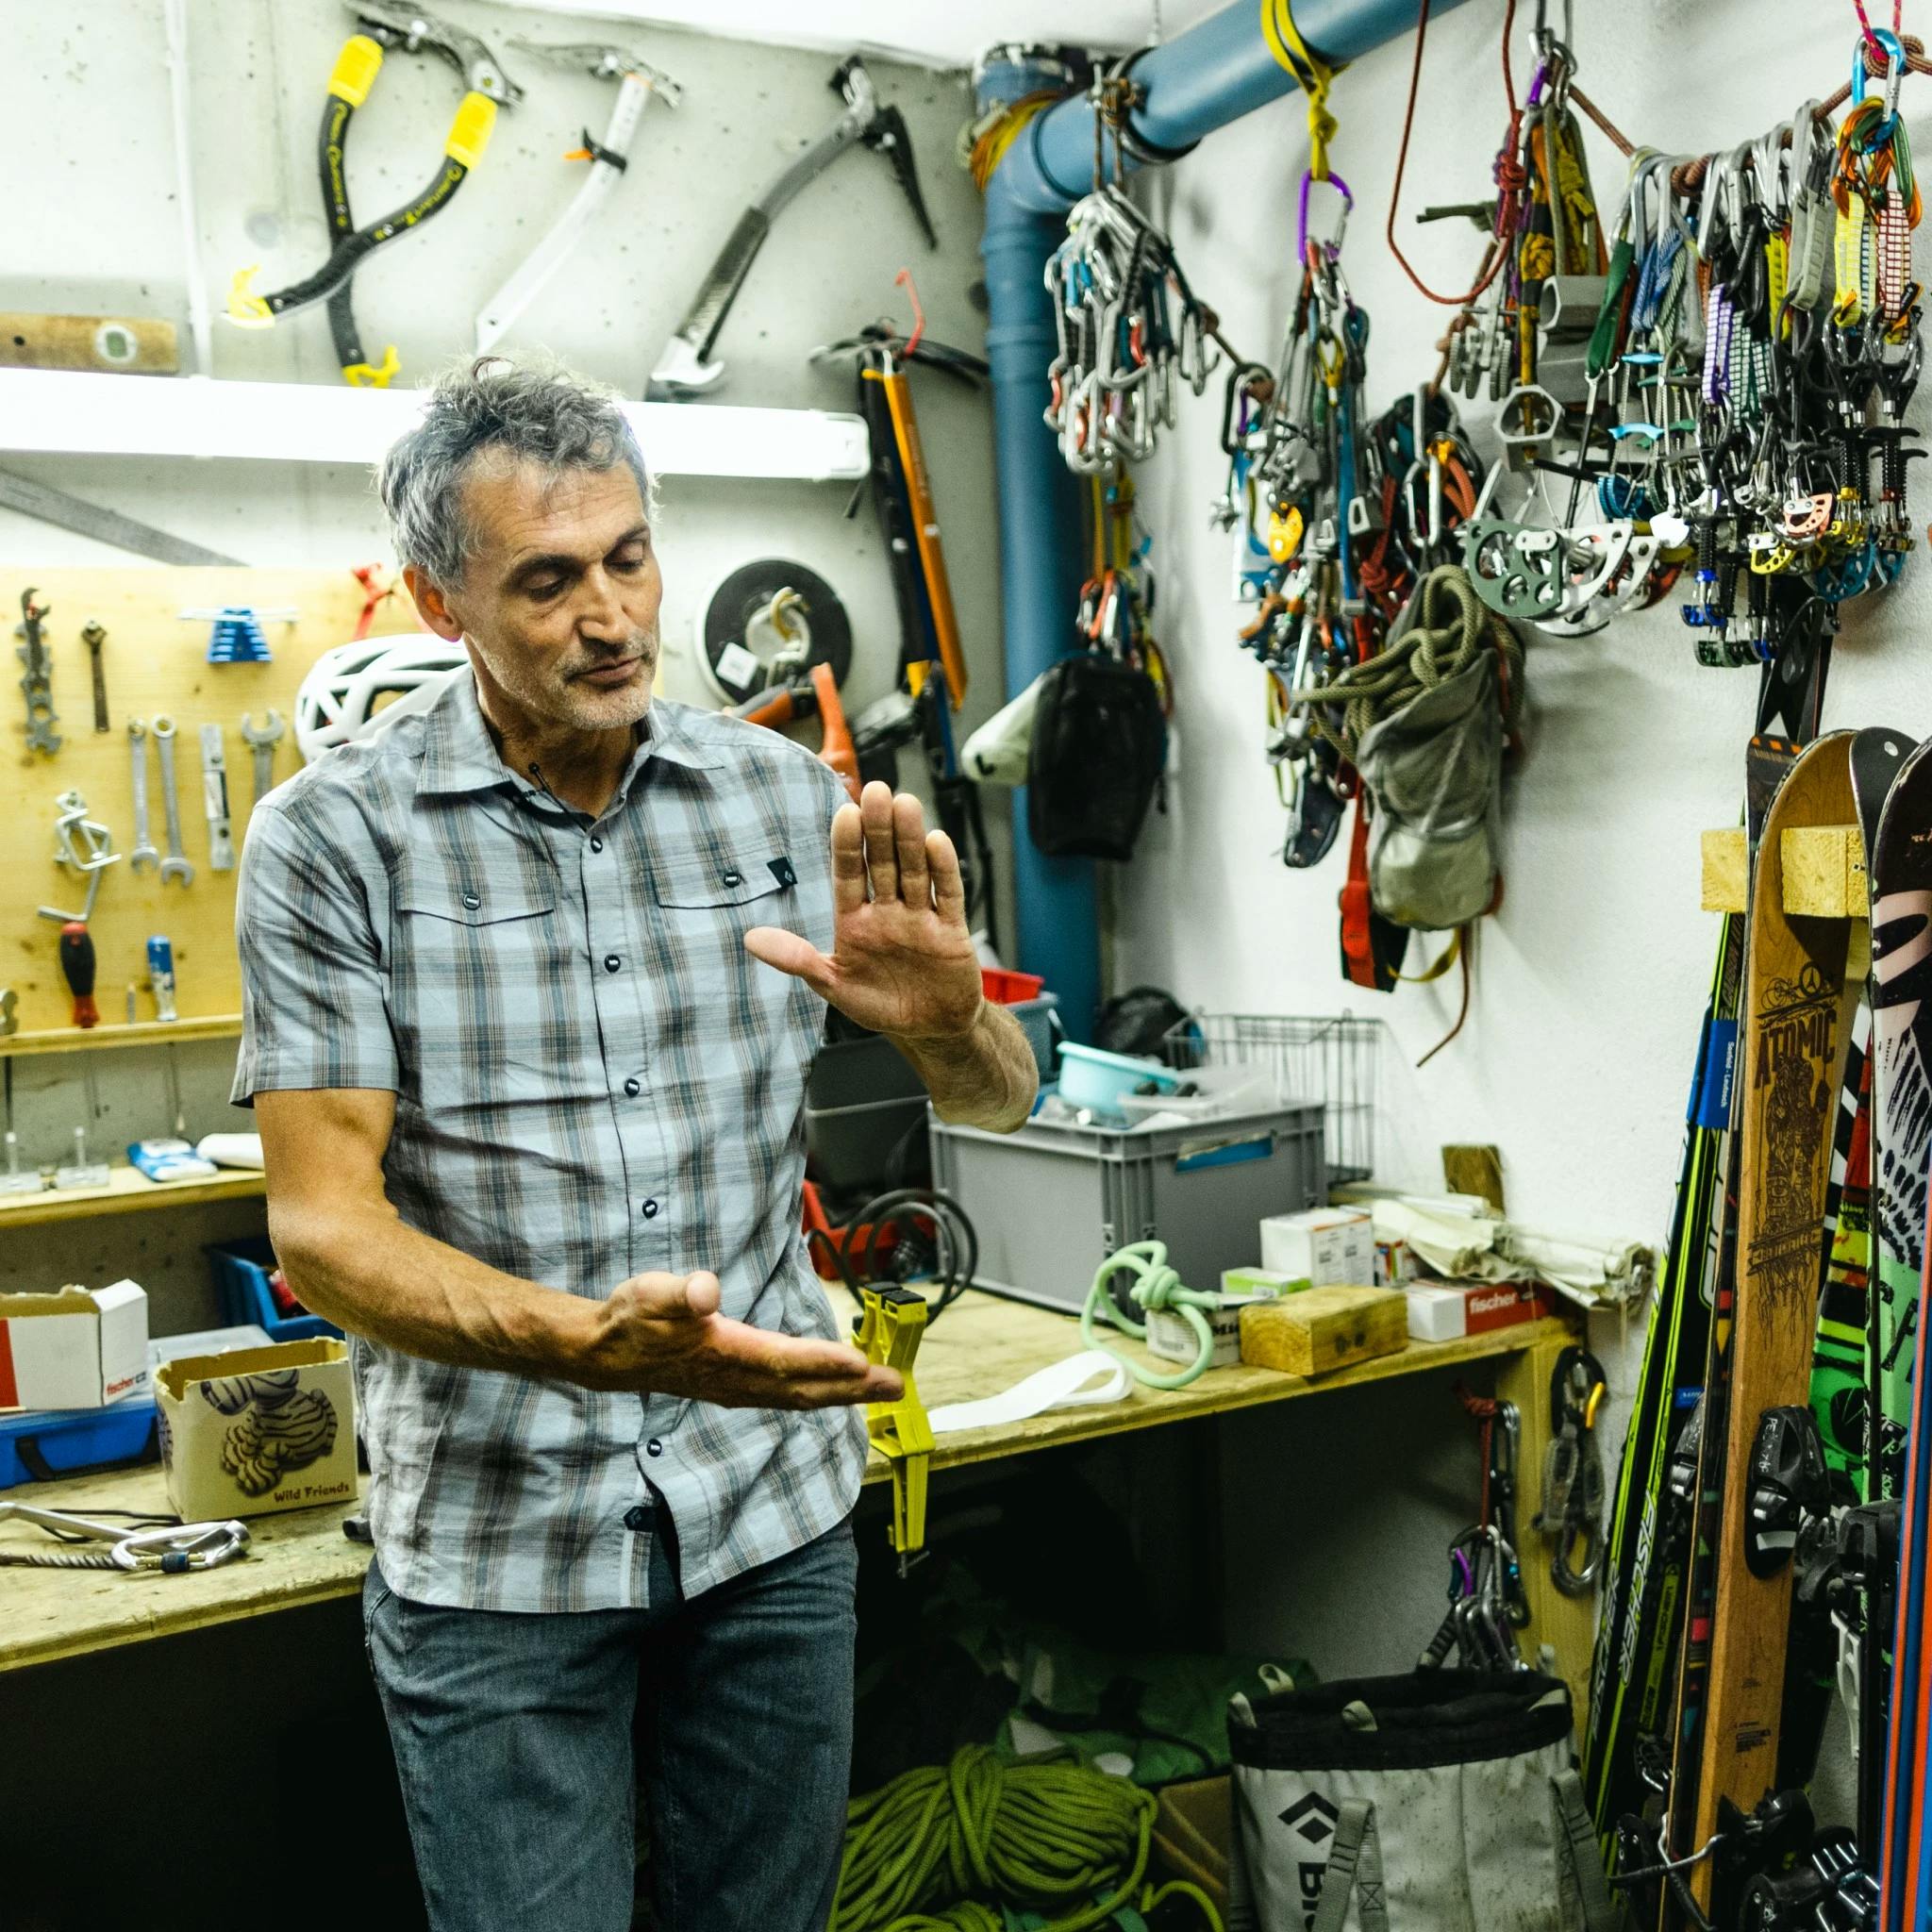 Reini Scherer and his tools of choice for the mountains